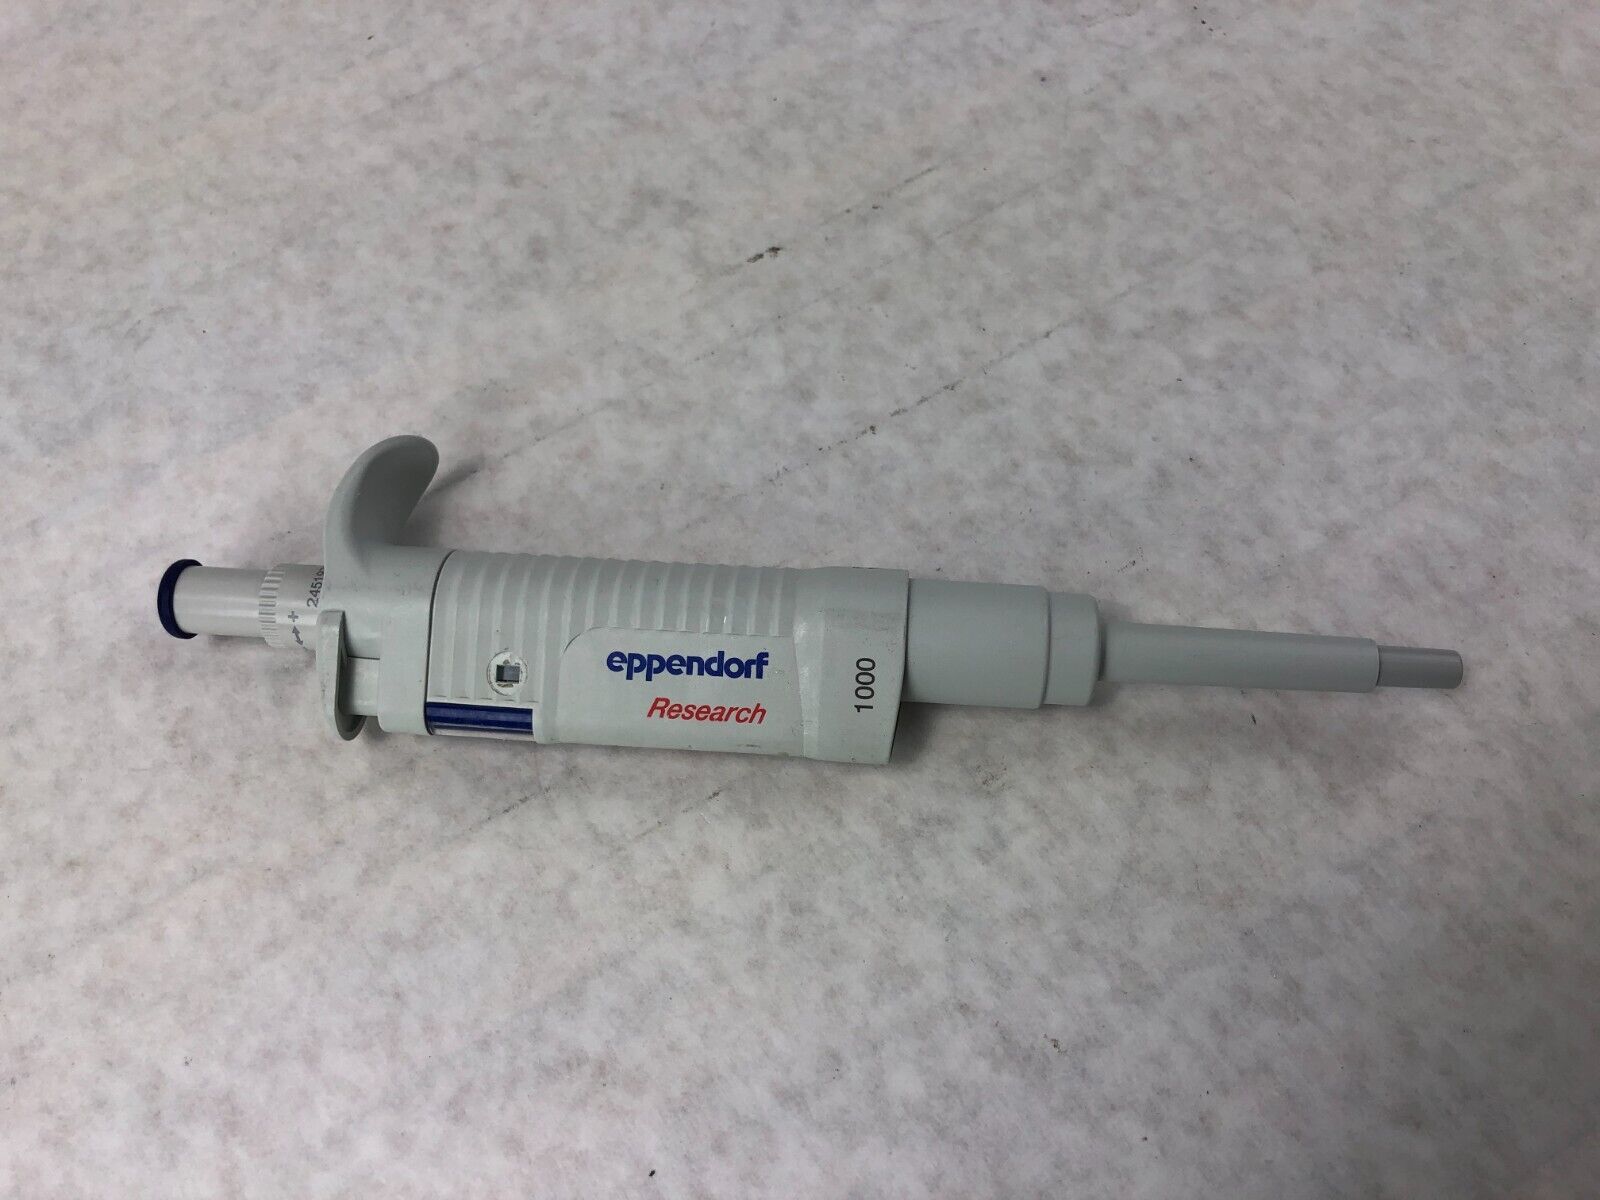 Lot of 3 Eppendorf Research 100-1000uL 1000 Pippette